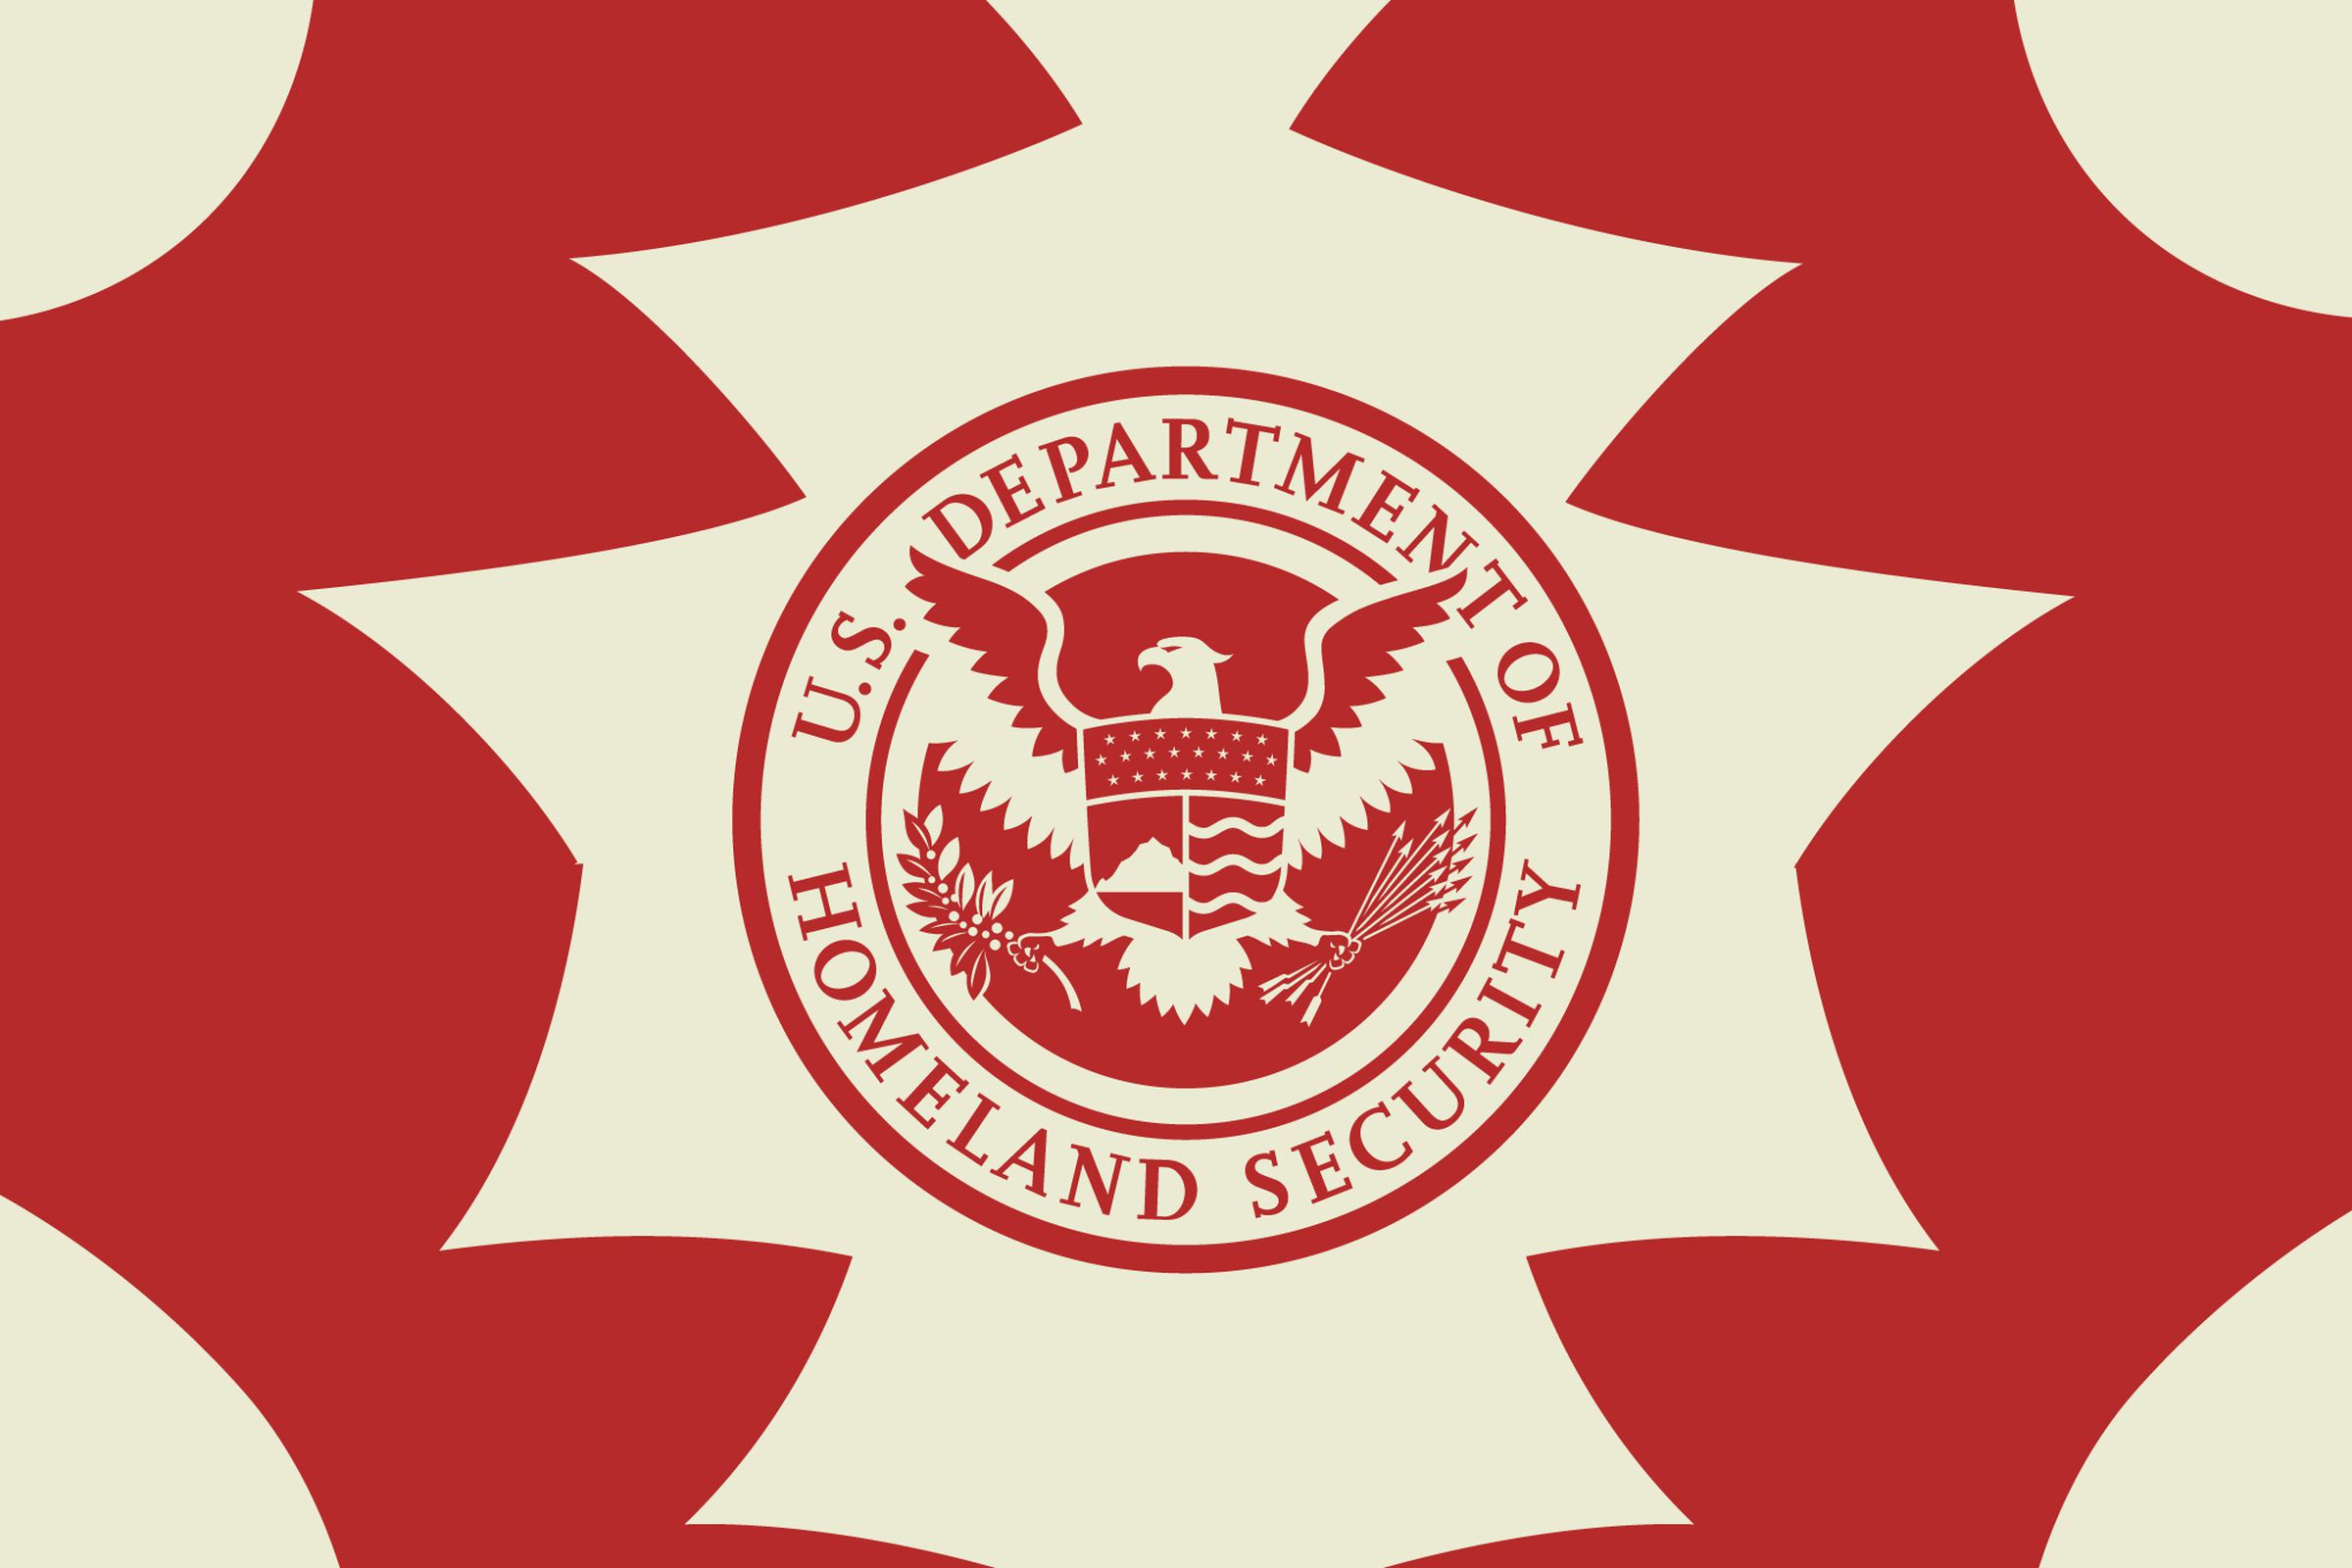 Illustration of the seal for the US Department of Homeland Security on a red and tan background.